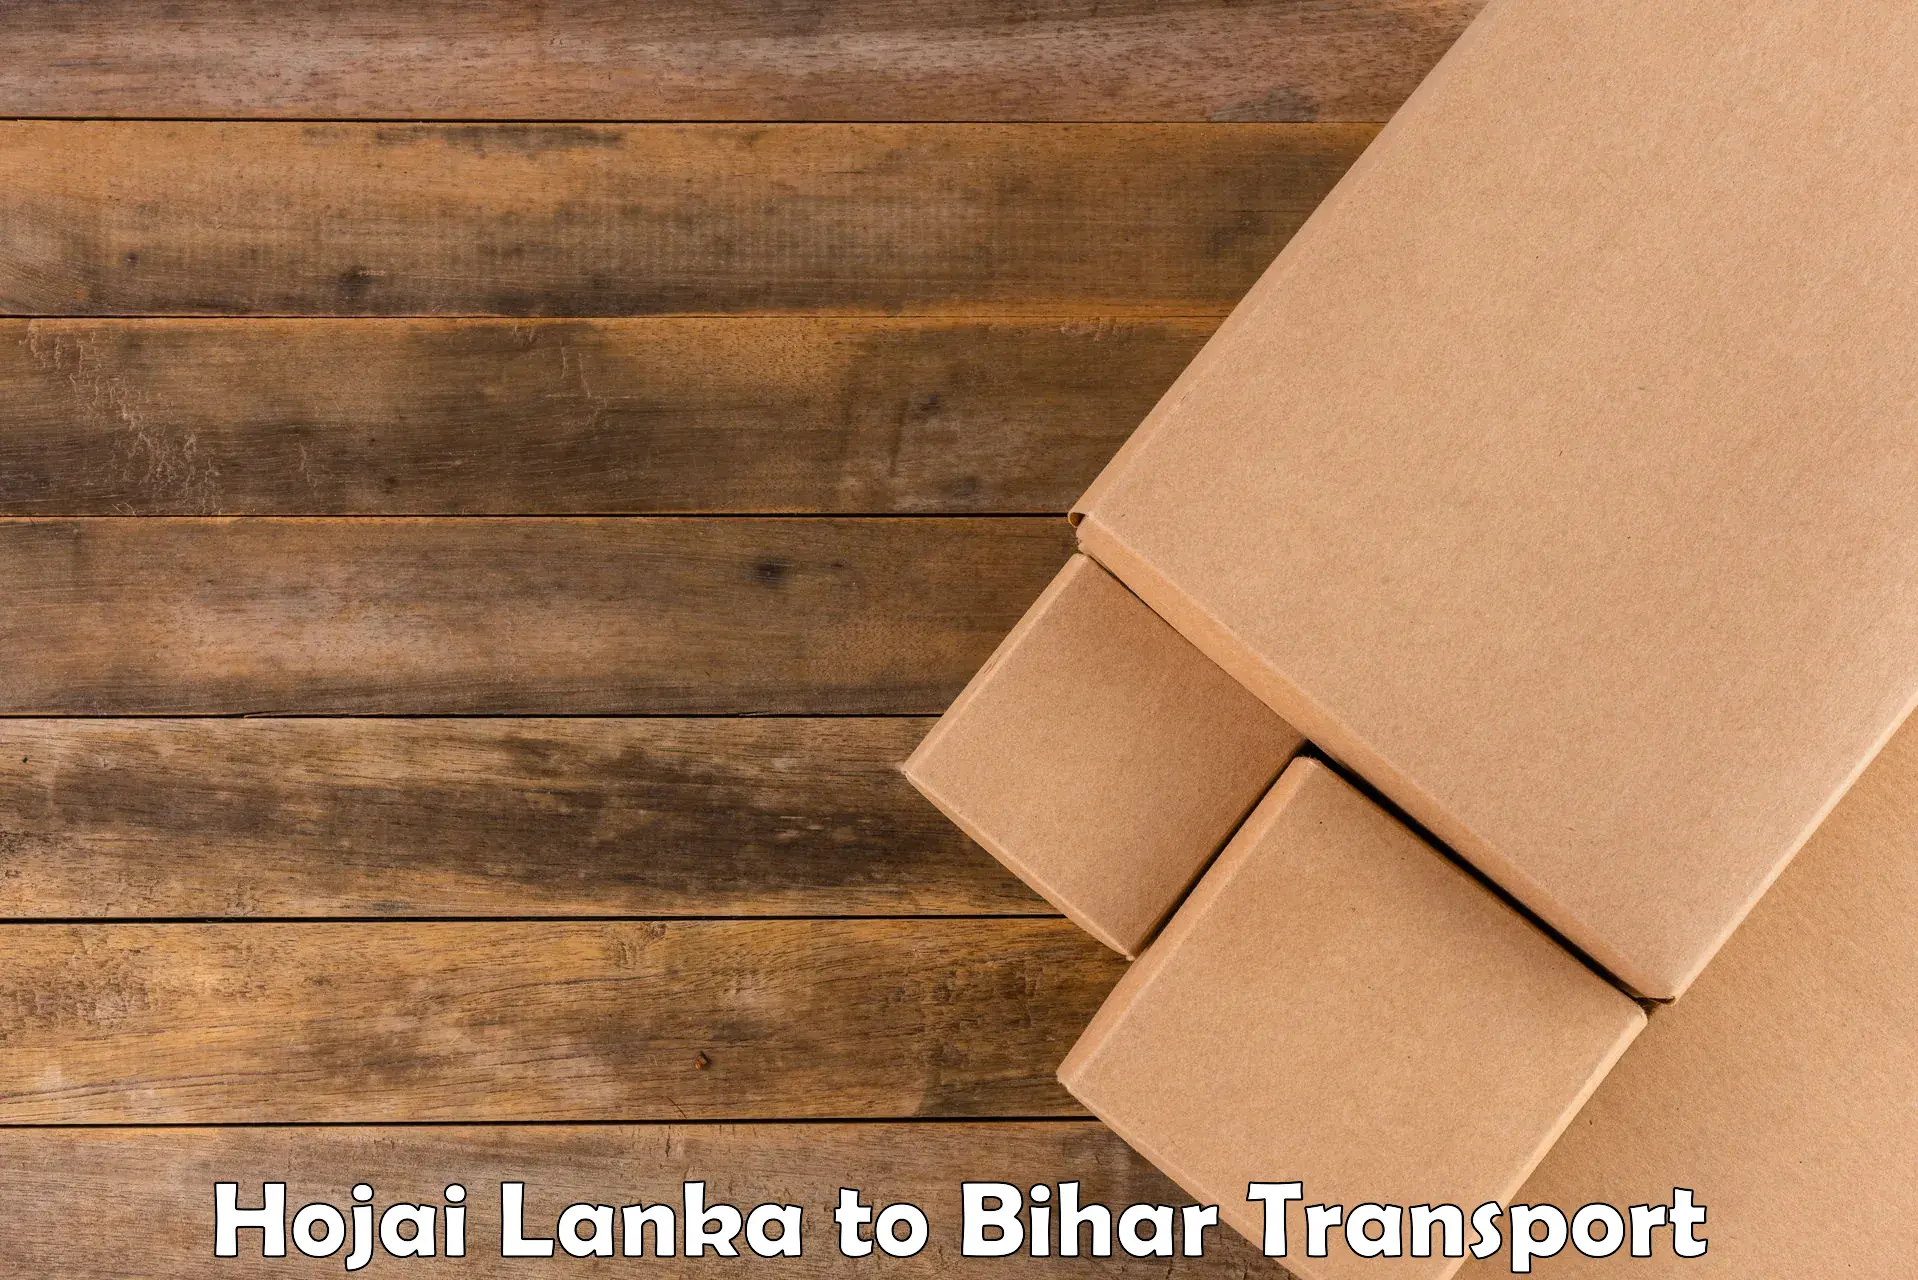 Part load transport service in India Hojai Lanka to Giddha